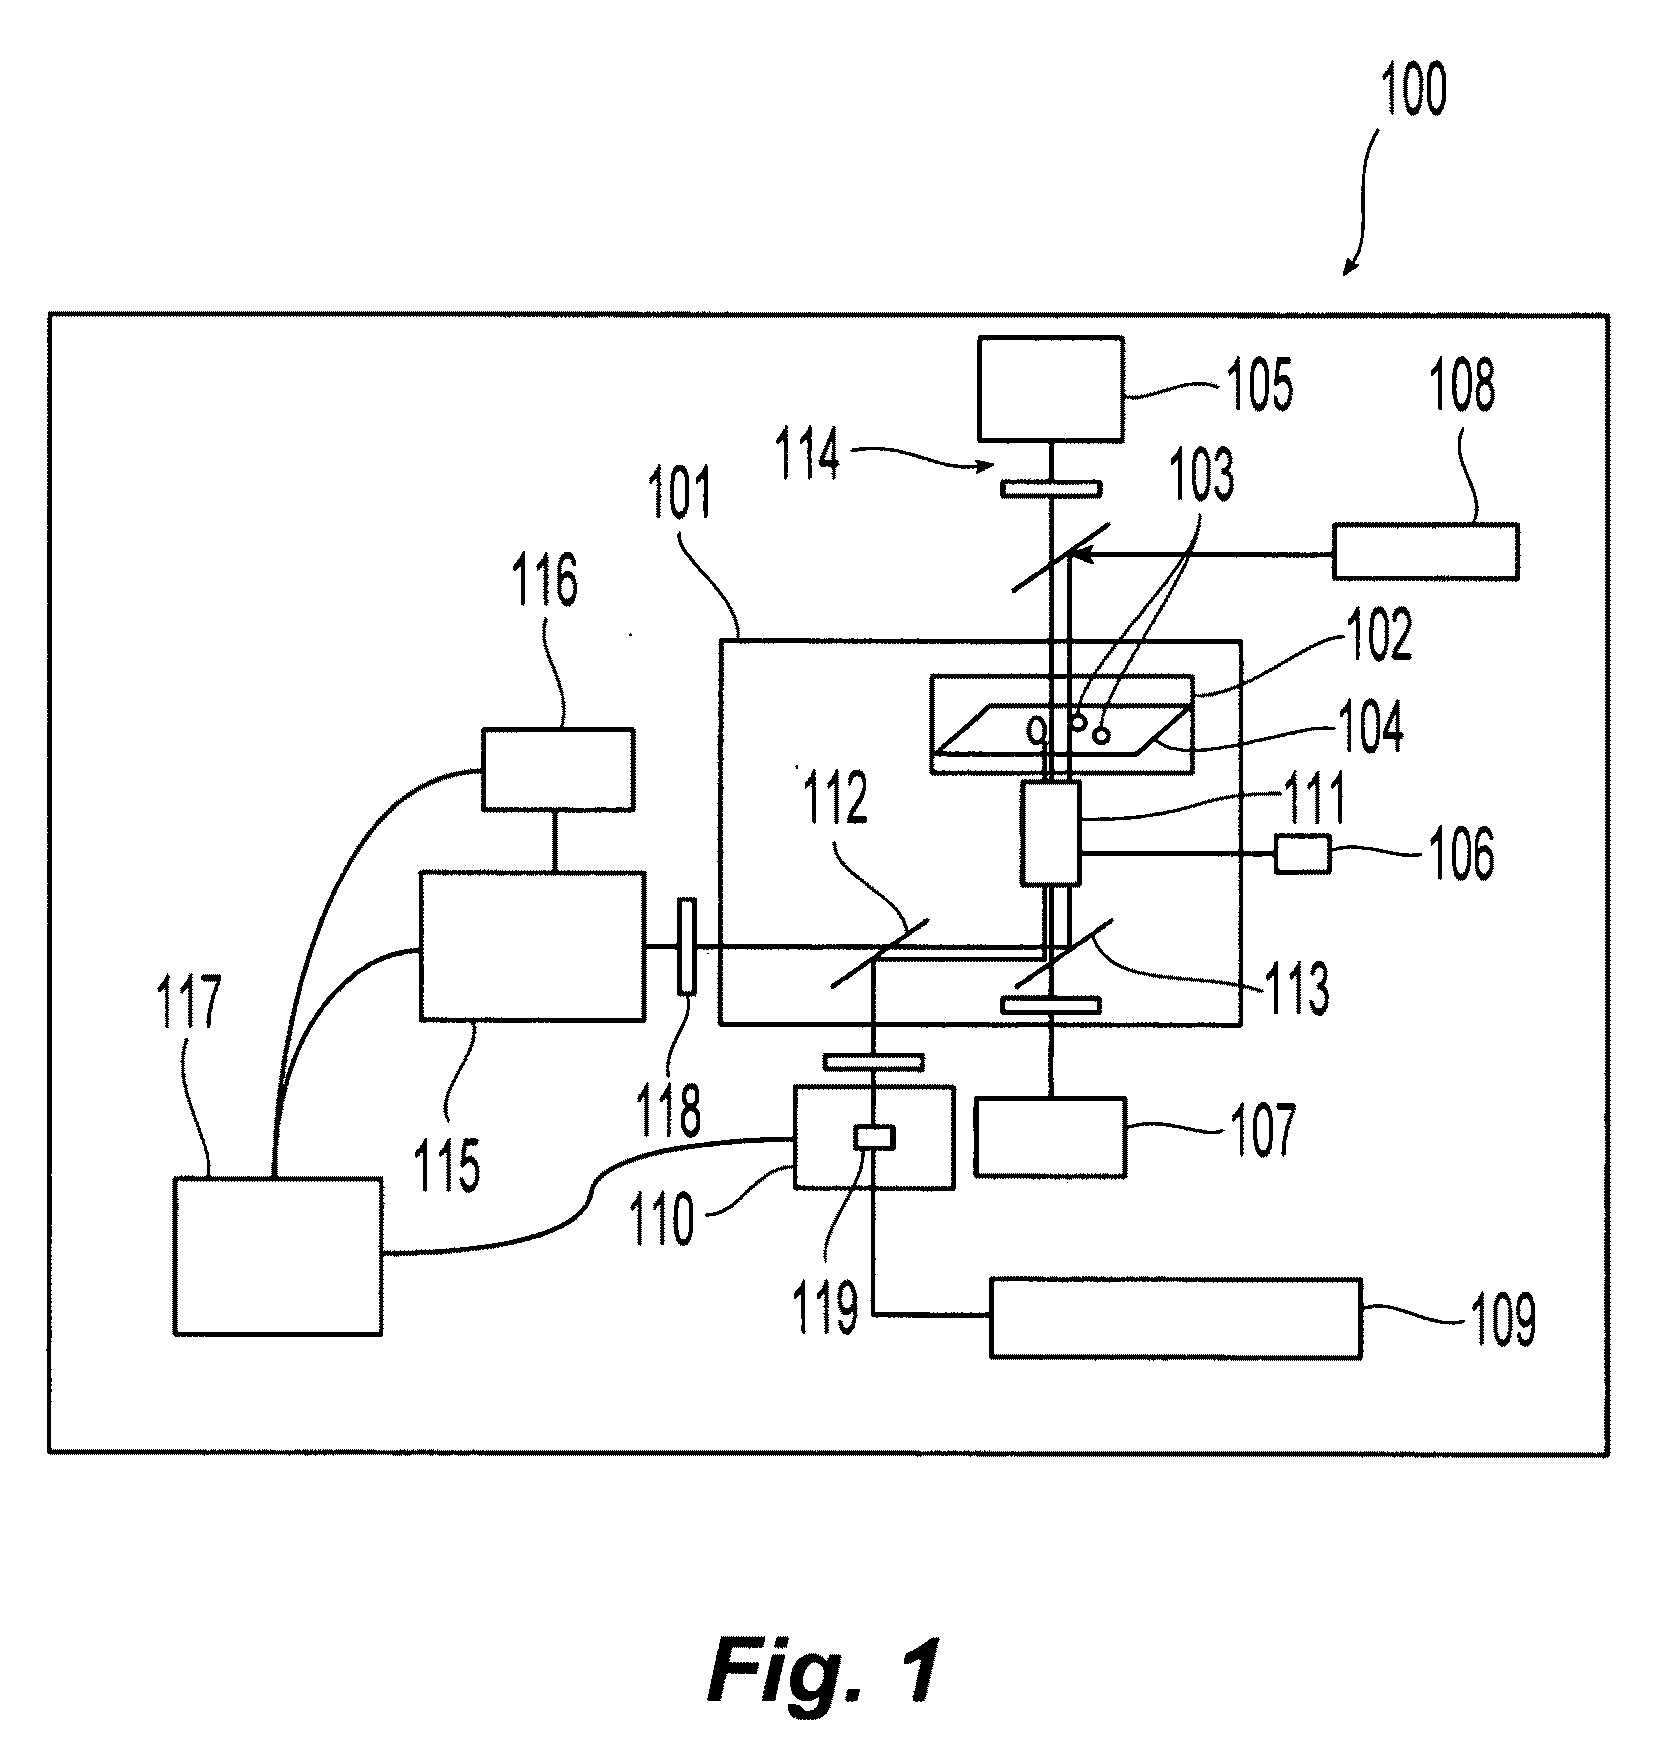 Apparatus and method for dynamic cellular probing and diagnostics using holographic optical forcing array